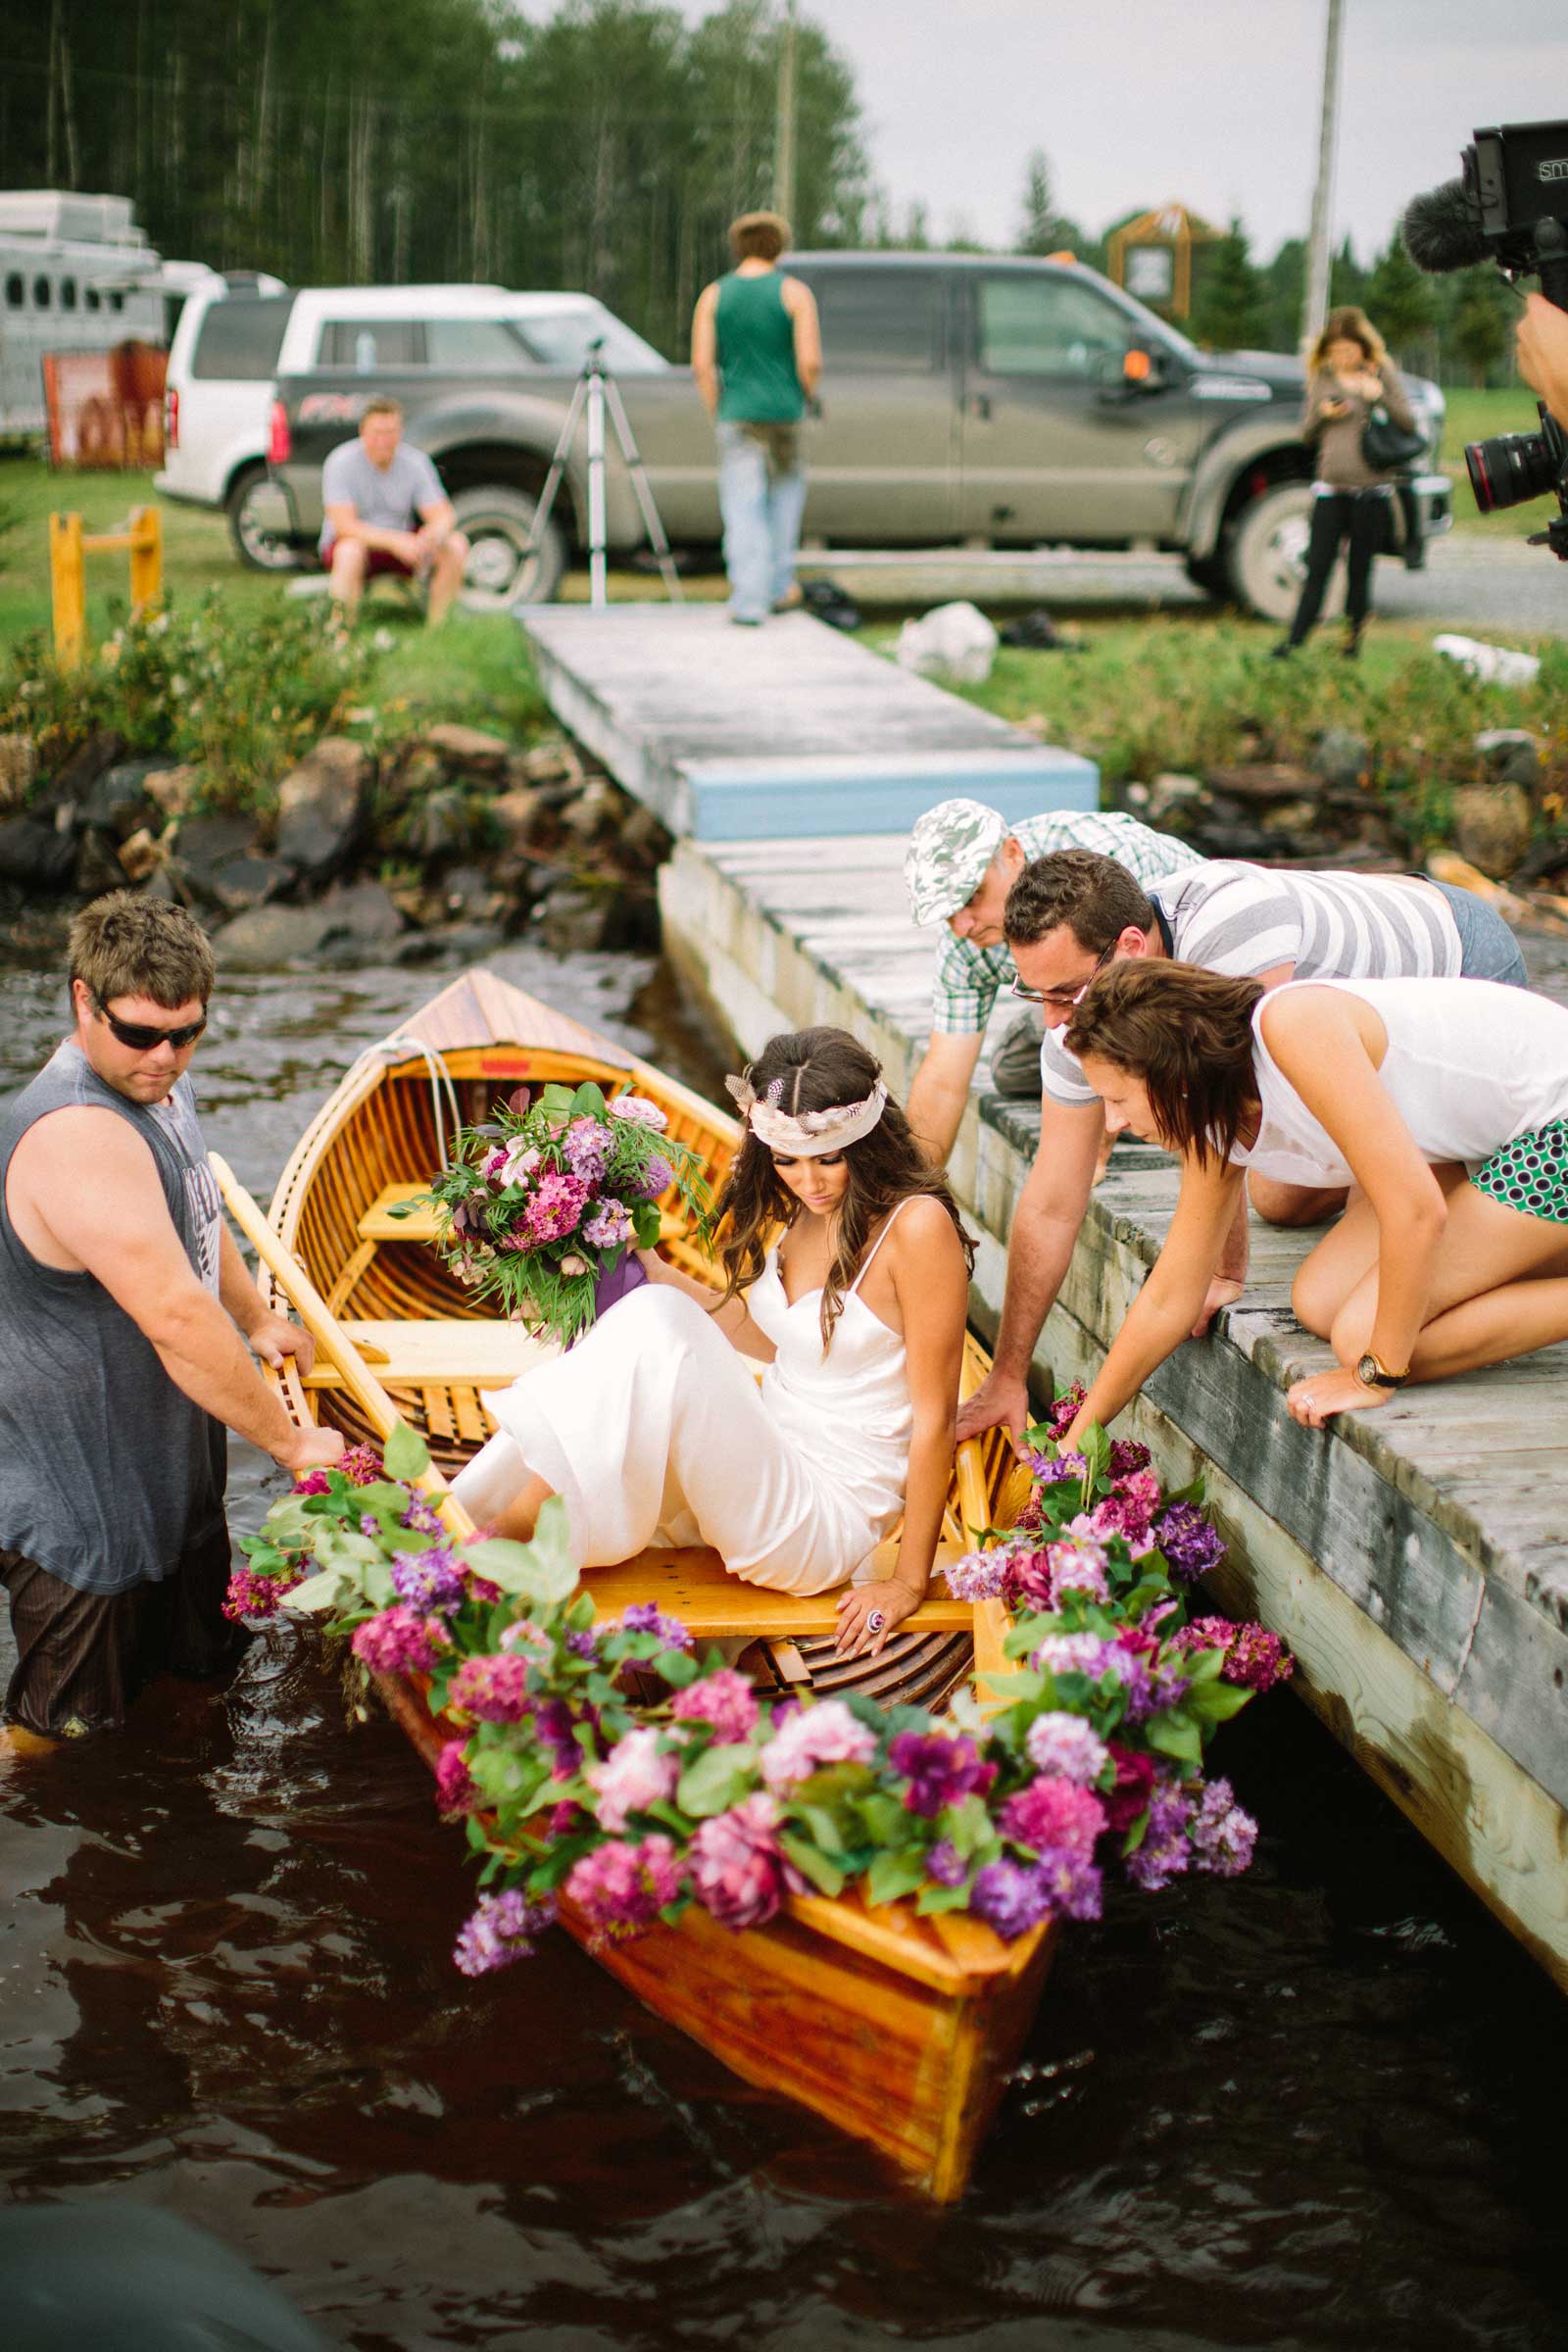 Getting model into water wedluxe wedding inspiration